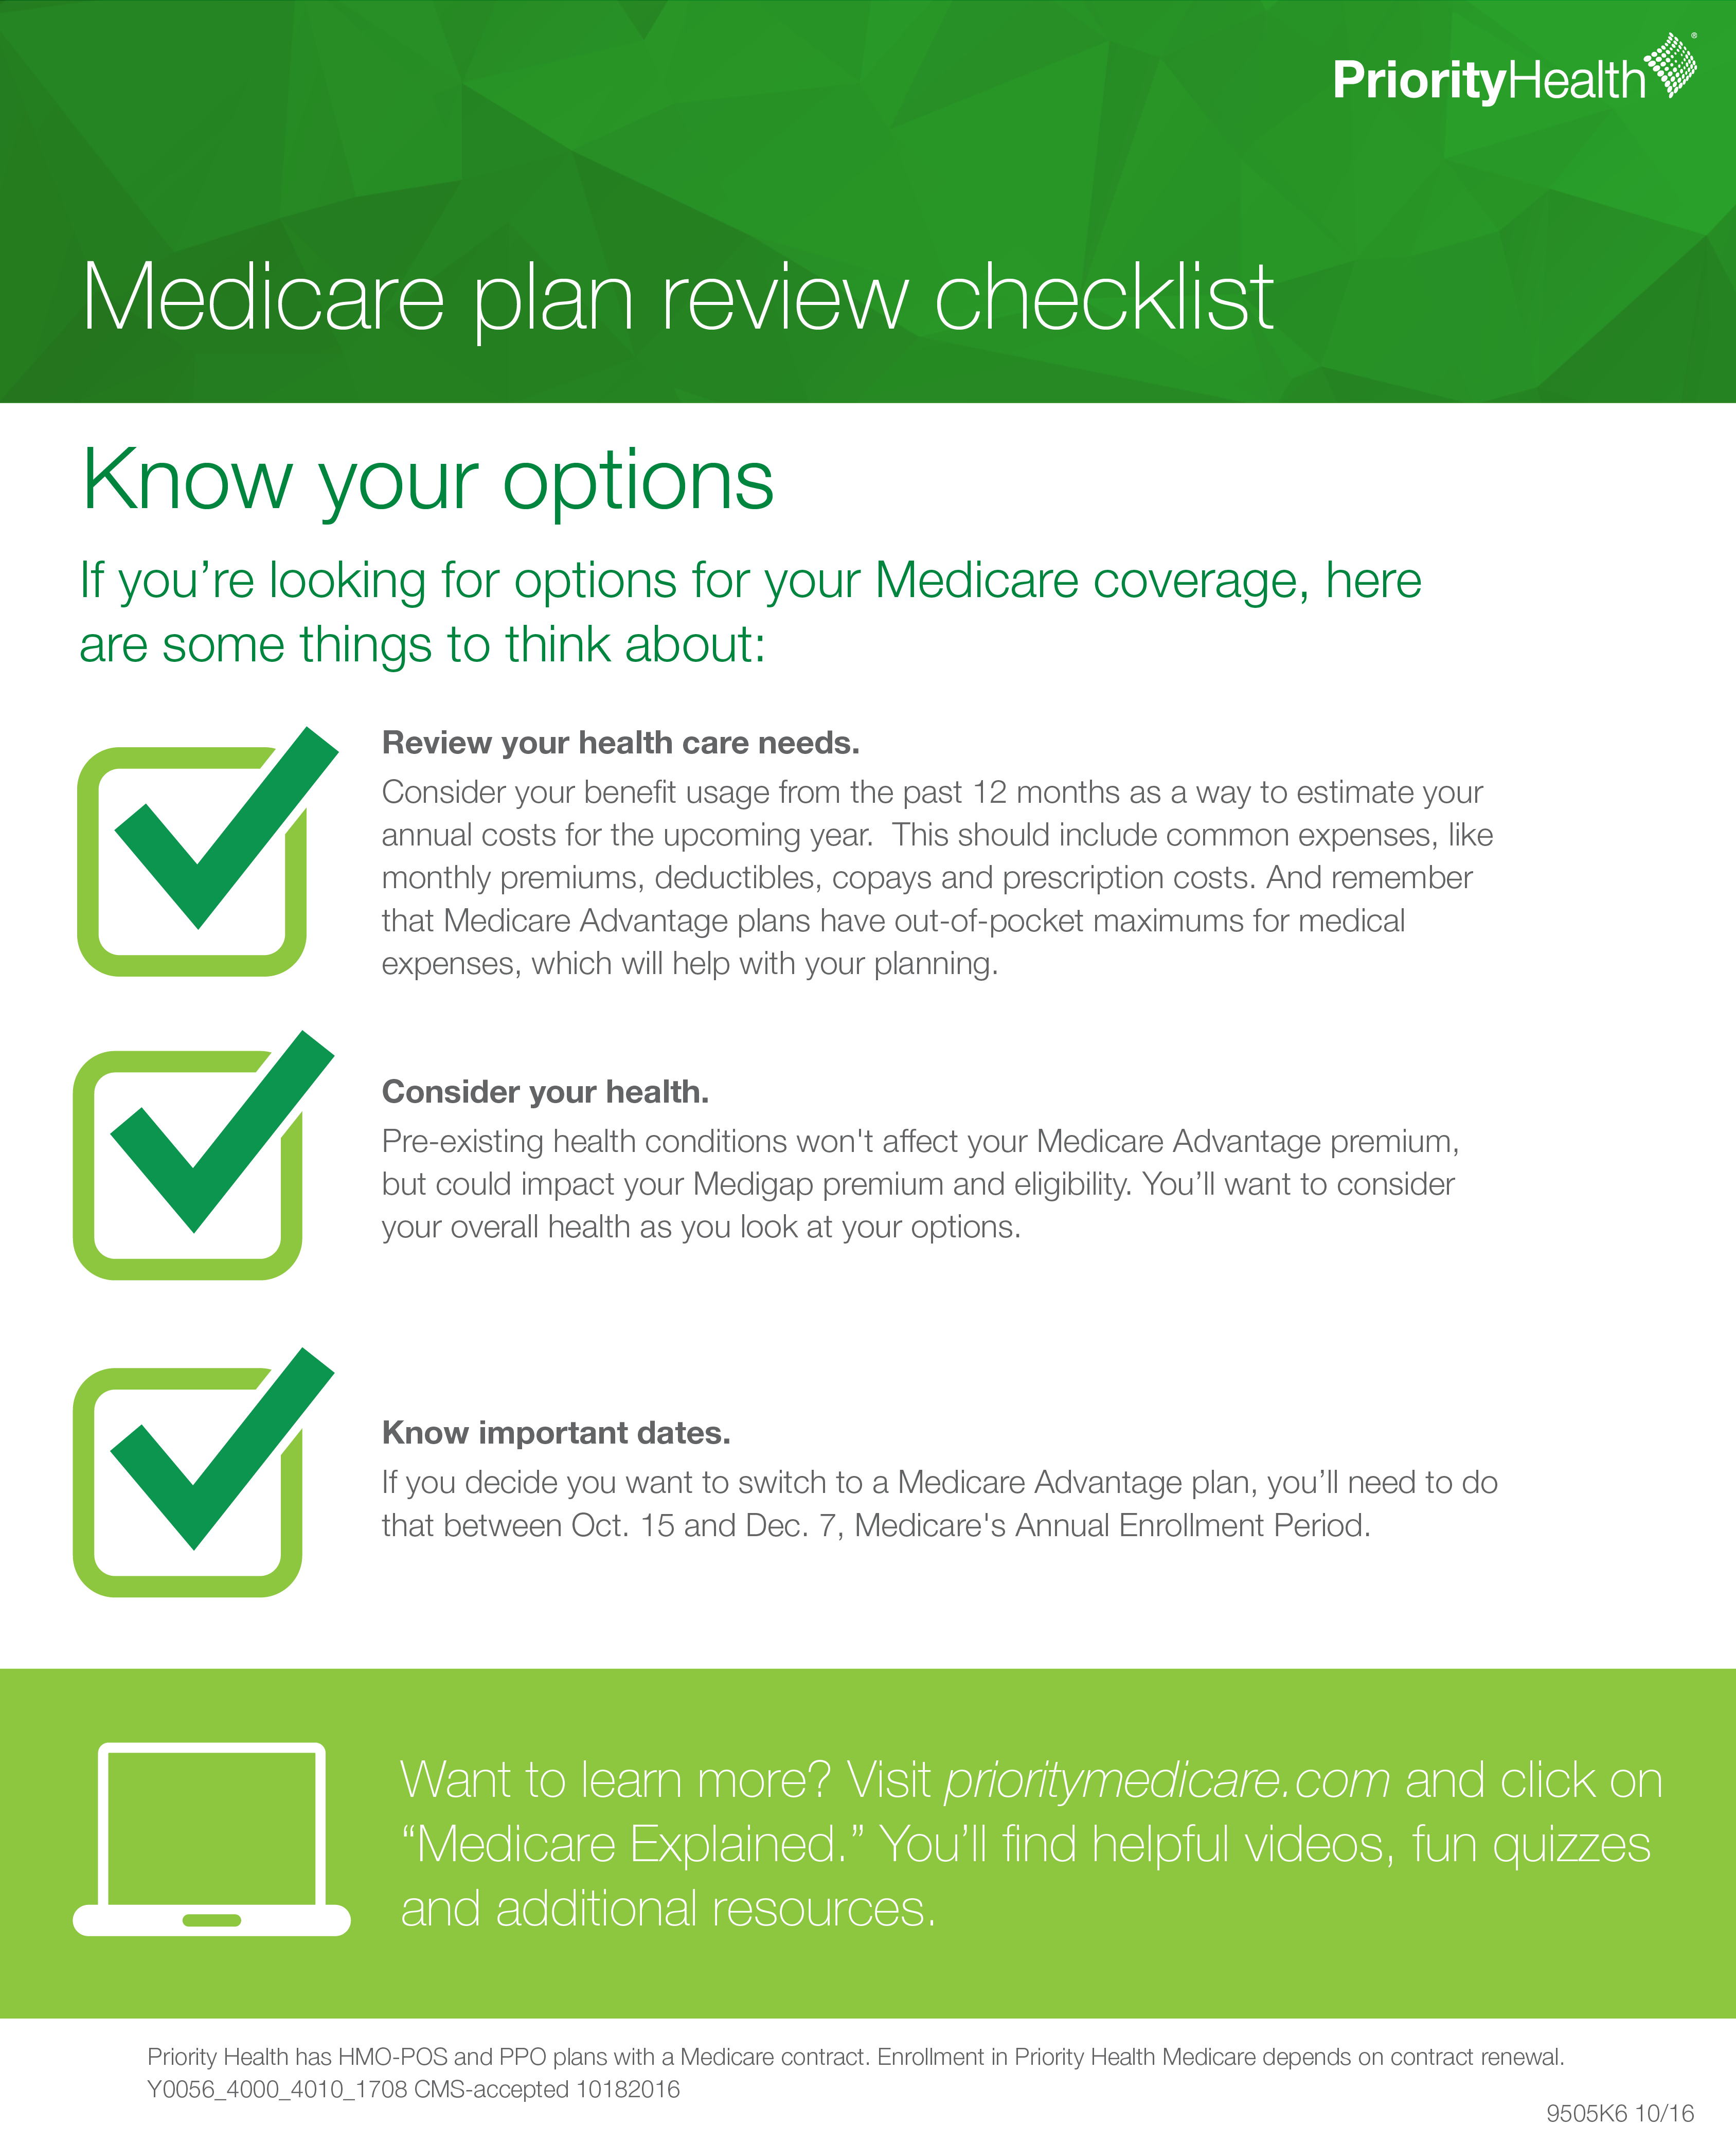 Medicare: My Premium Increased. Now What?  ThinkHealth